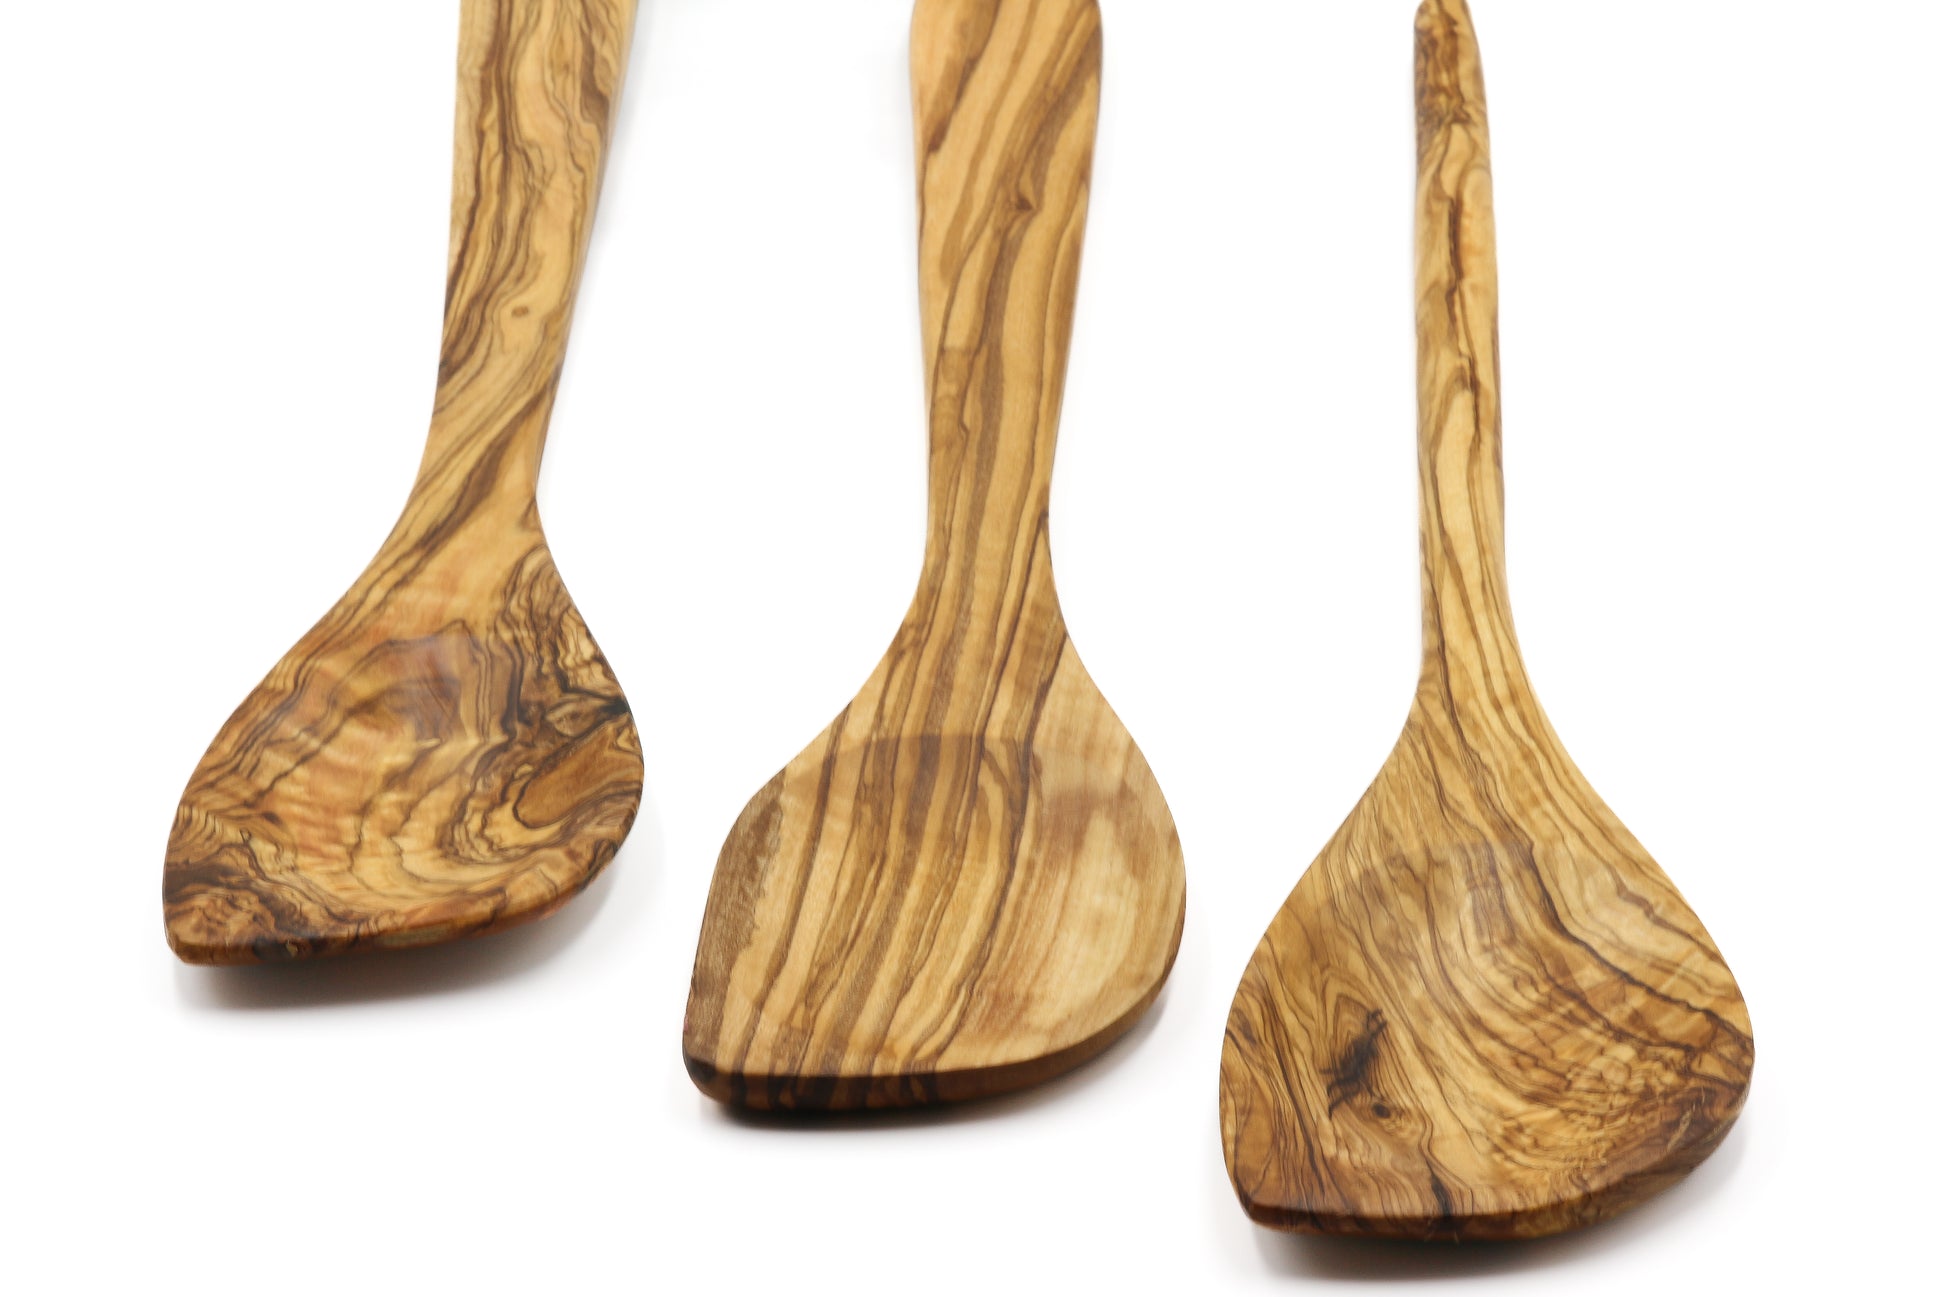 Artisan-made pointed cooking spoon in genuine olive wood